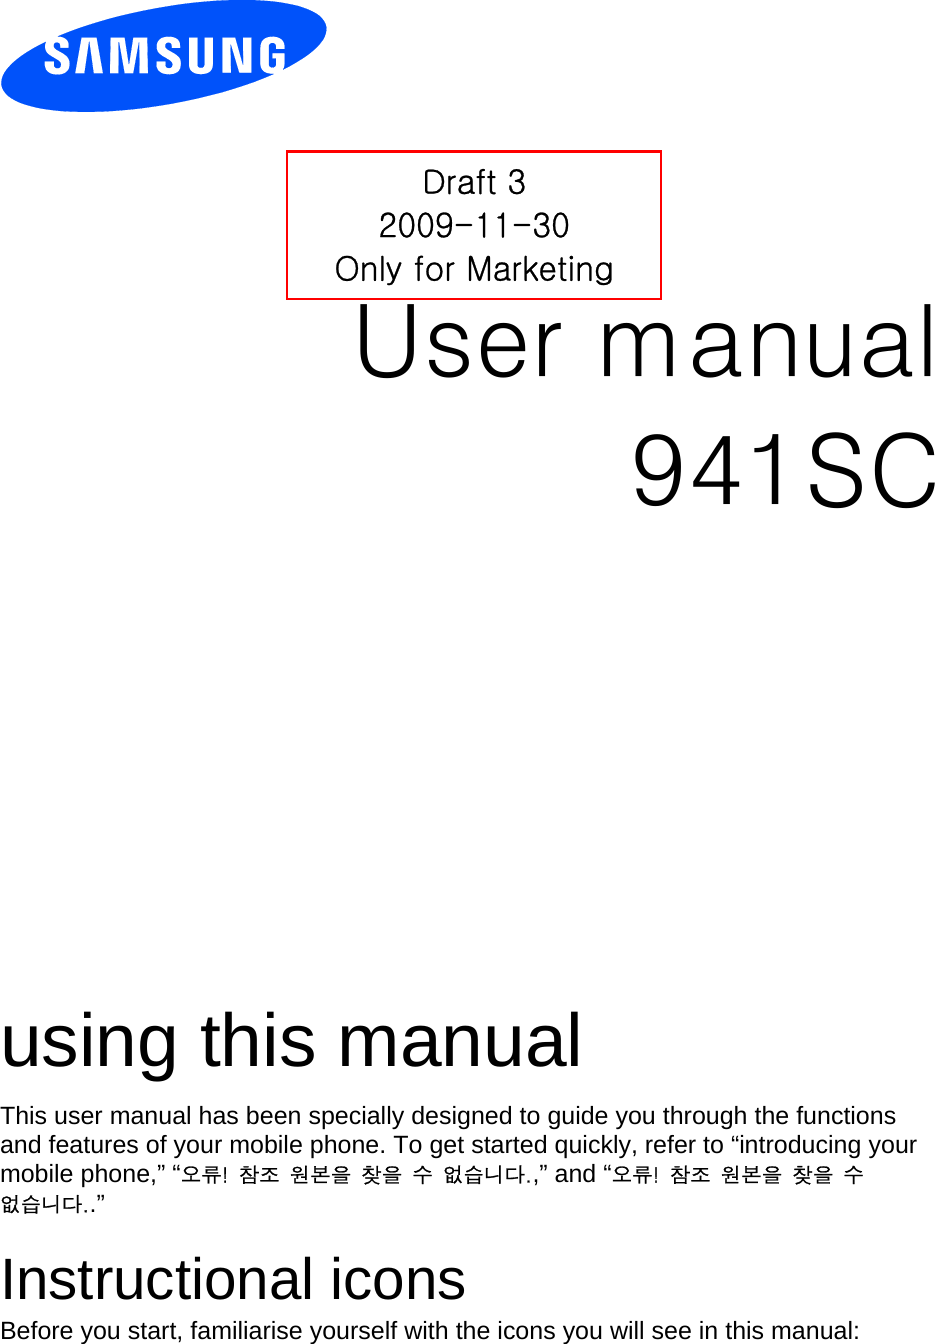          User manual 941SC                  using this manual This user manual has been specially designed to guide you through the functions and features of your mobile phone. To get started quickly, refer to “introducing your mobile phone,” “오류!  참조  원본을  찾을  수  없습니다.,” and “오류!  참조  원본을  찾을  수 없습니다..”  Instructional icons Before you start, familiarise yourself with the icons you will see in this manual:   Draft 3 2009-11-30 Only for Marketing 